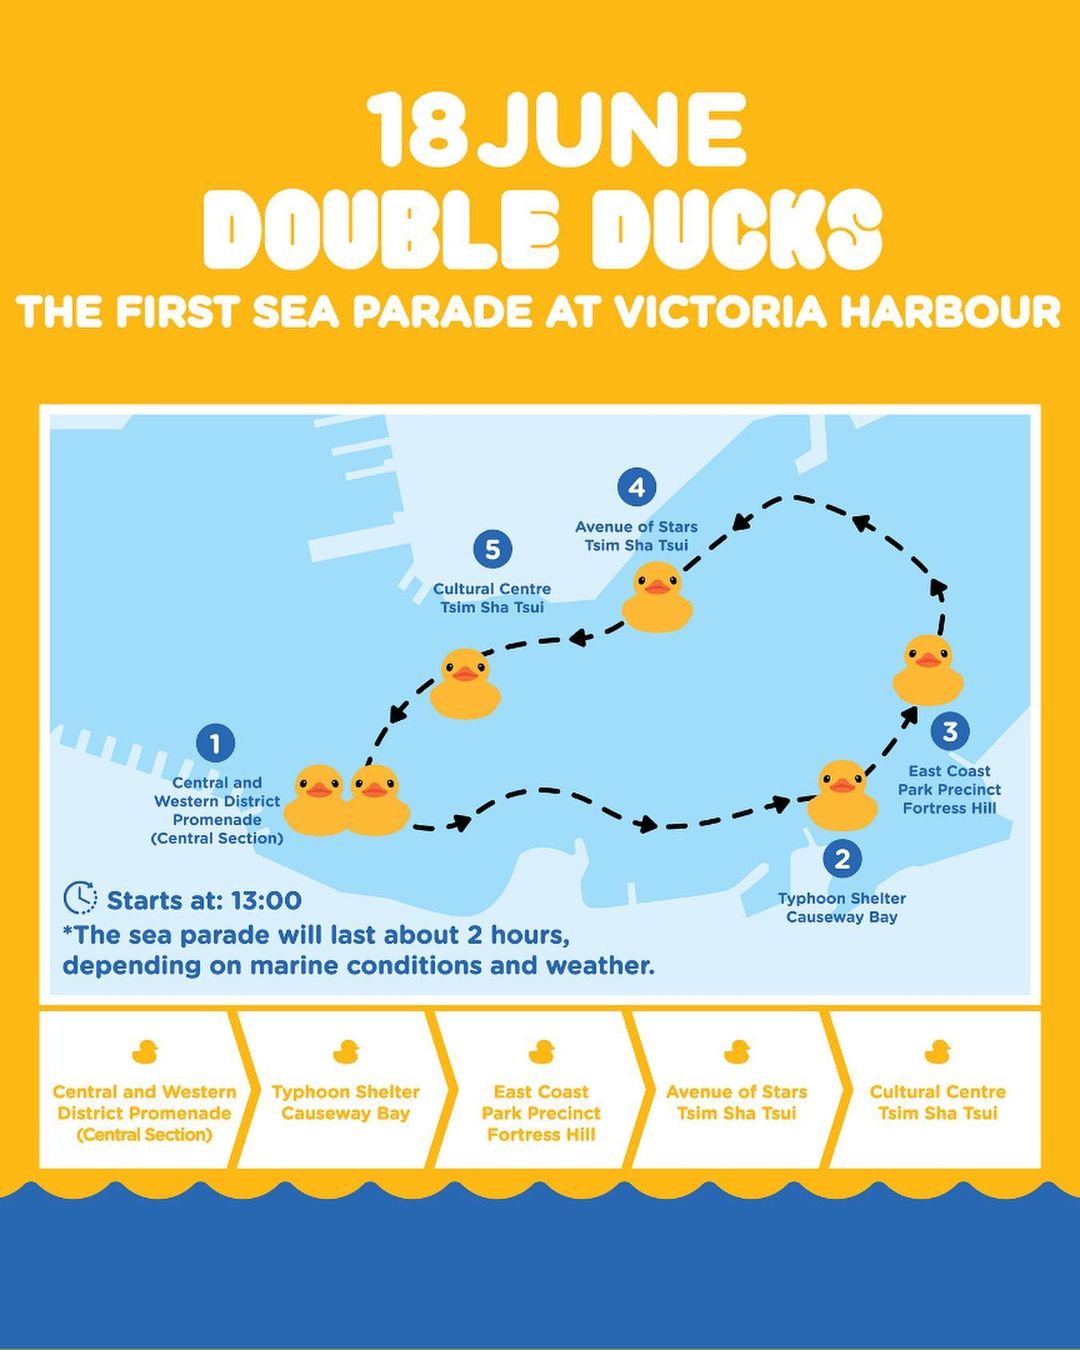 The route map for the giant rubber duck's sea parade on June 18.